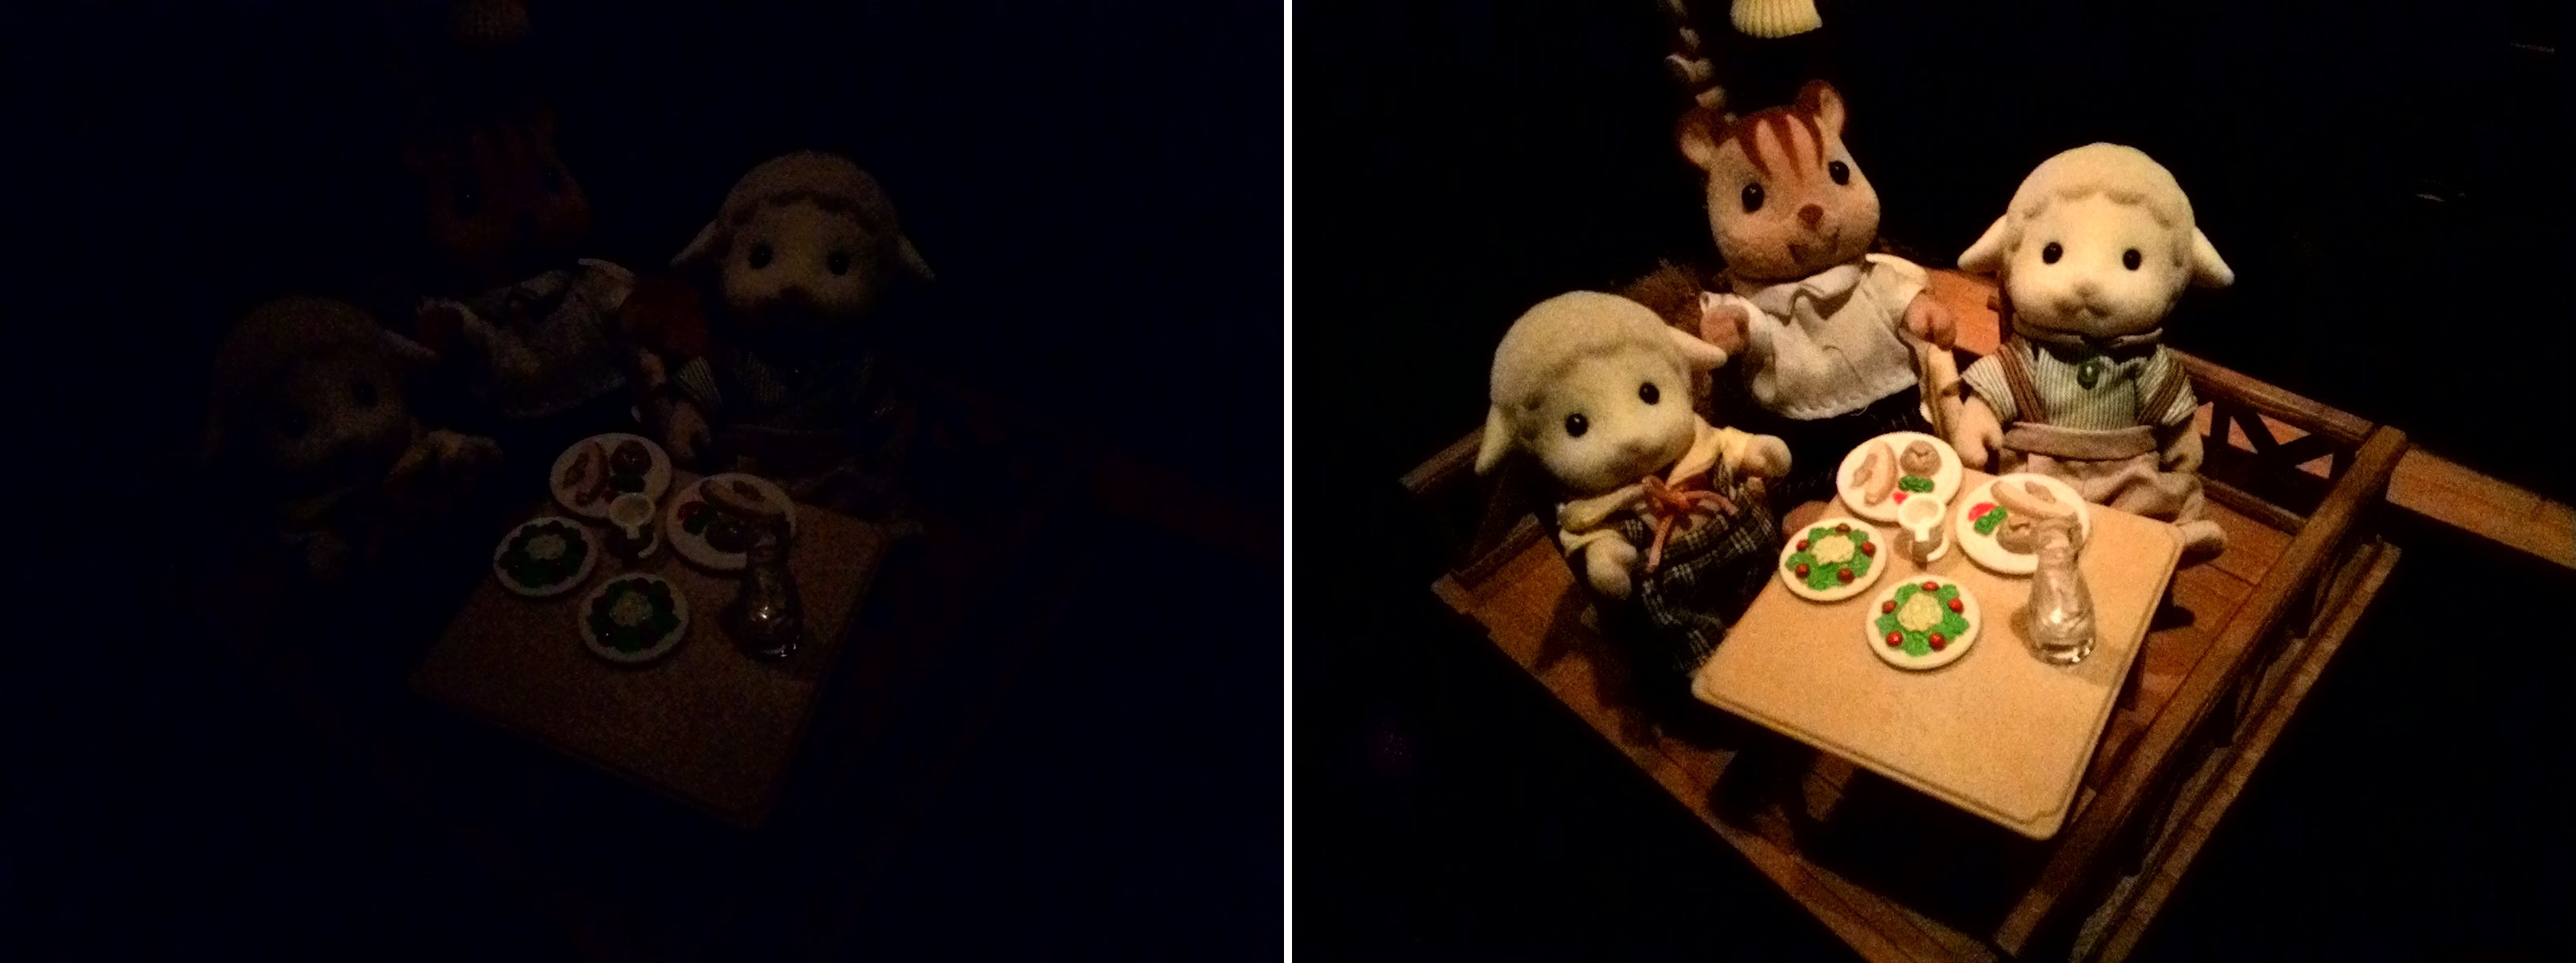 ZenFone 5 low-light camera samples with (right) and without (left) PixelMaster technology. - Has ASUS's PixelMaster technology mastered low-light photography? You be the judge